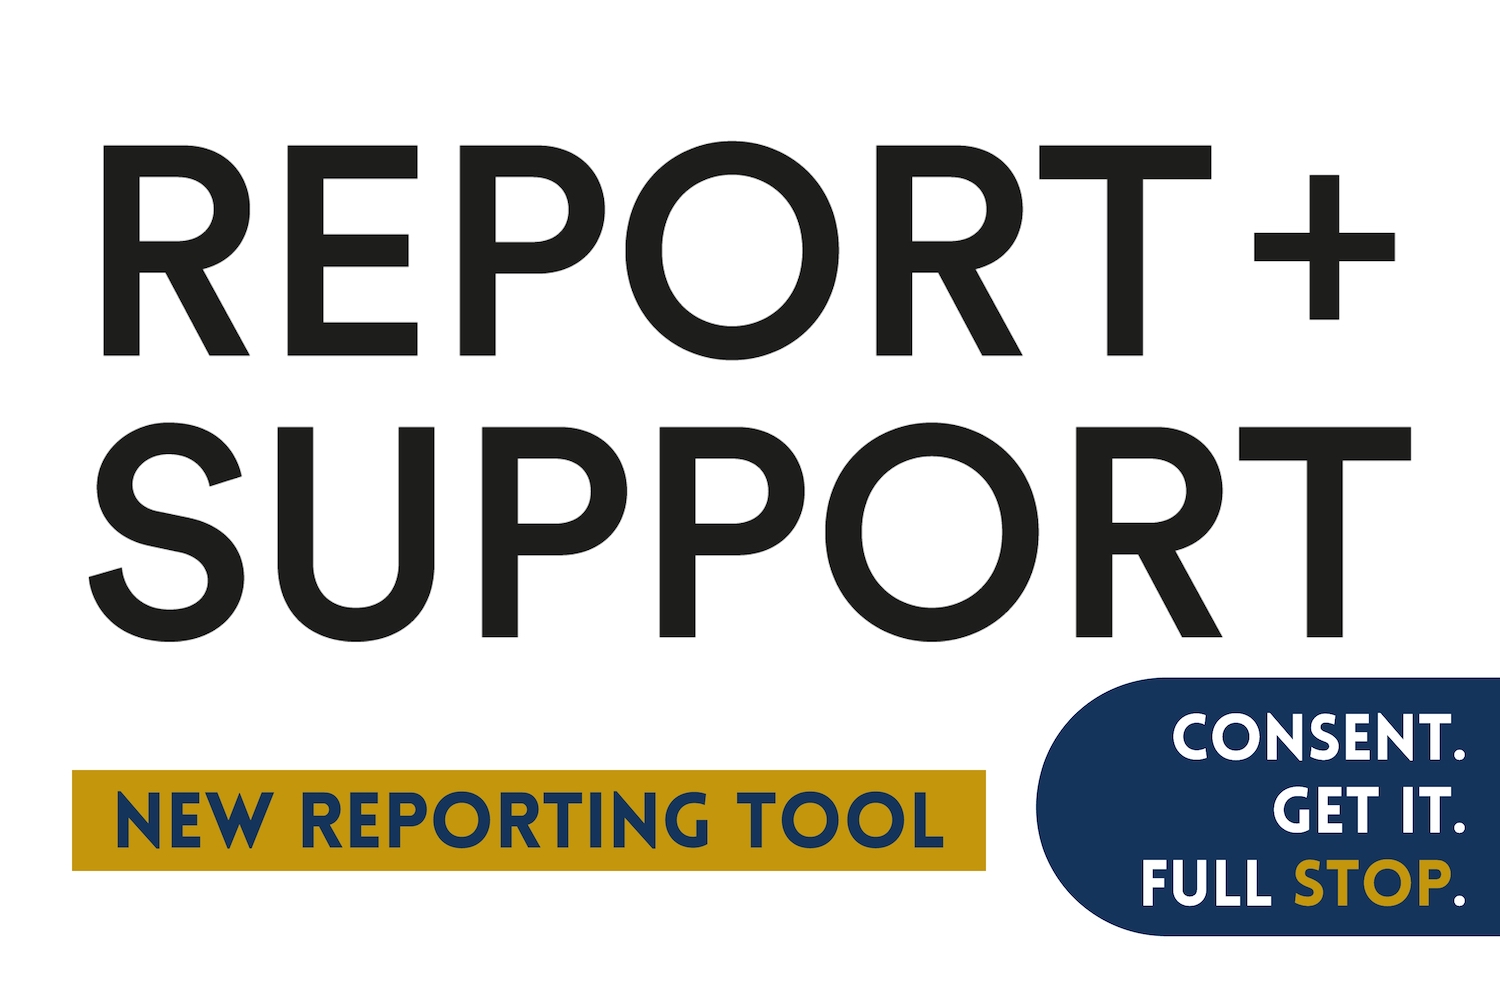 Report and support. New reporting tool